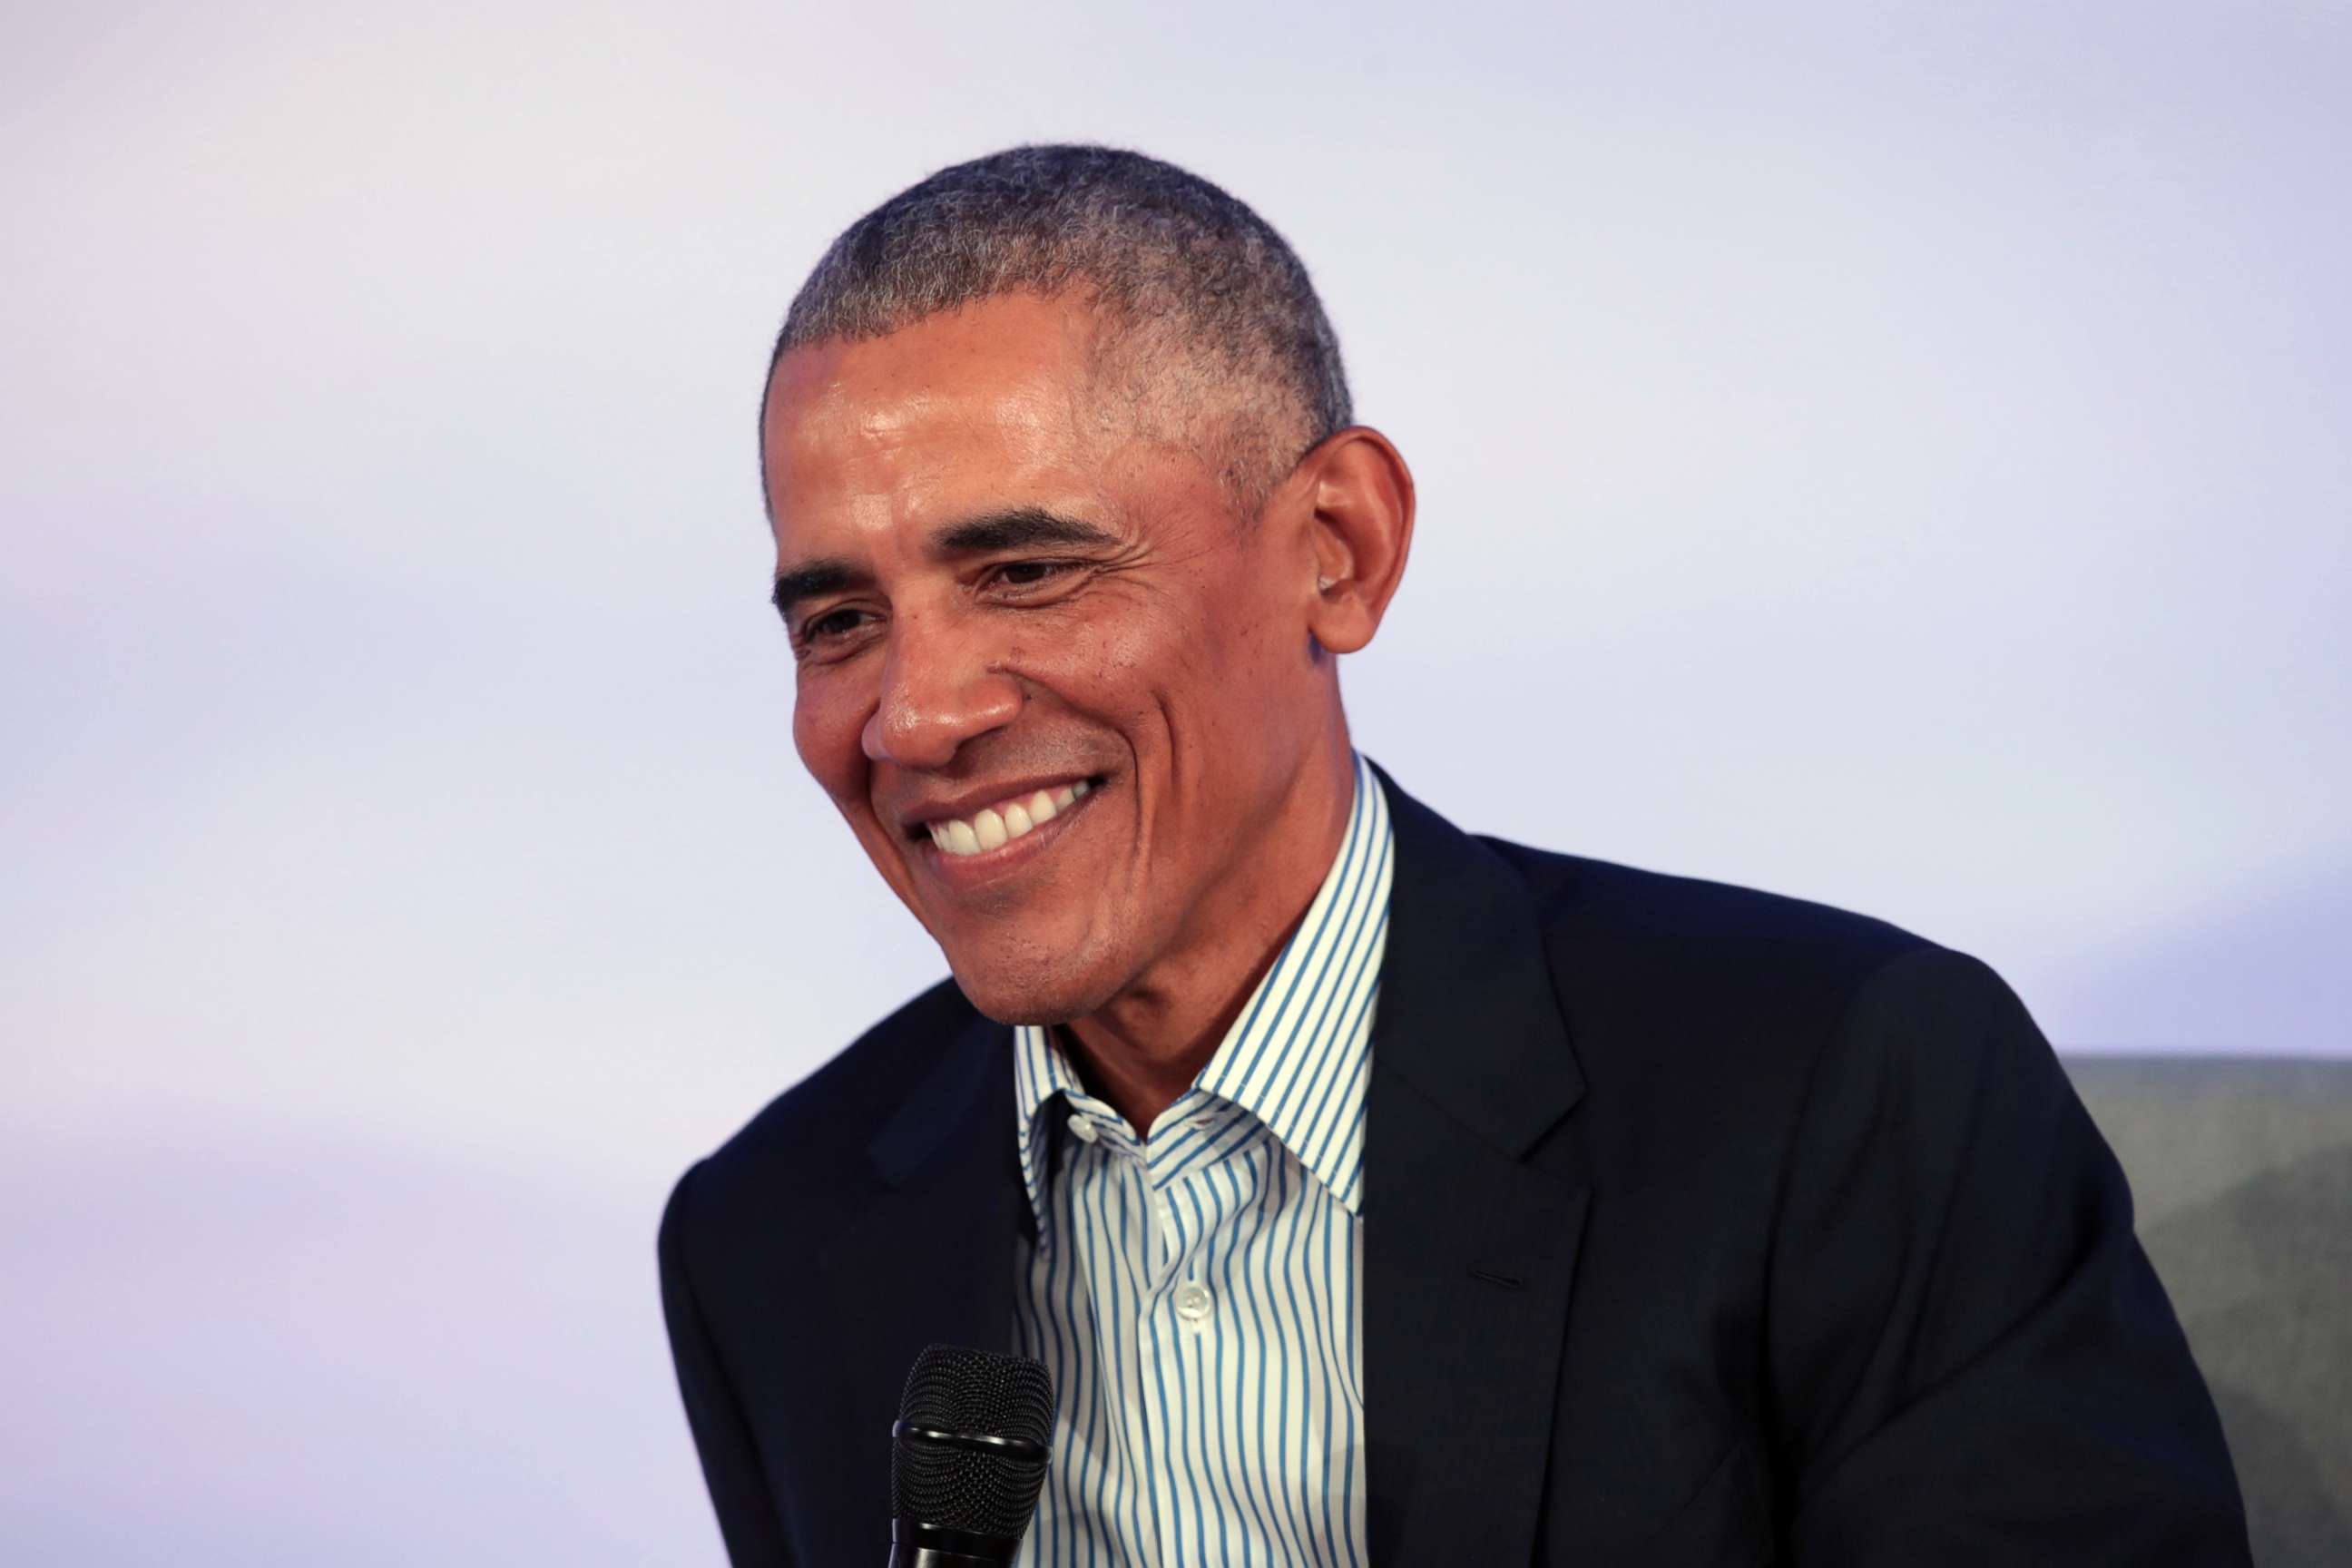 PHOTO: Former President Barack Obama speaks to guests at the Obama Foundation Summit on the campus of the Illinois Institute of Technology on Oct. 29, 2019 in Chicago.